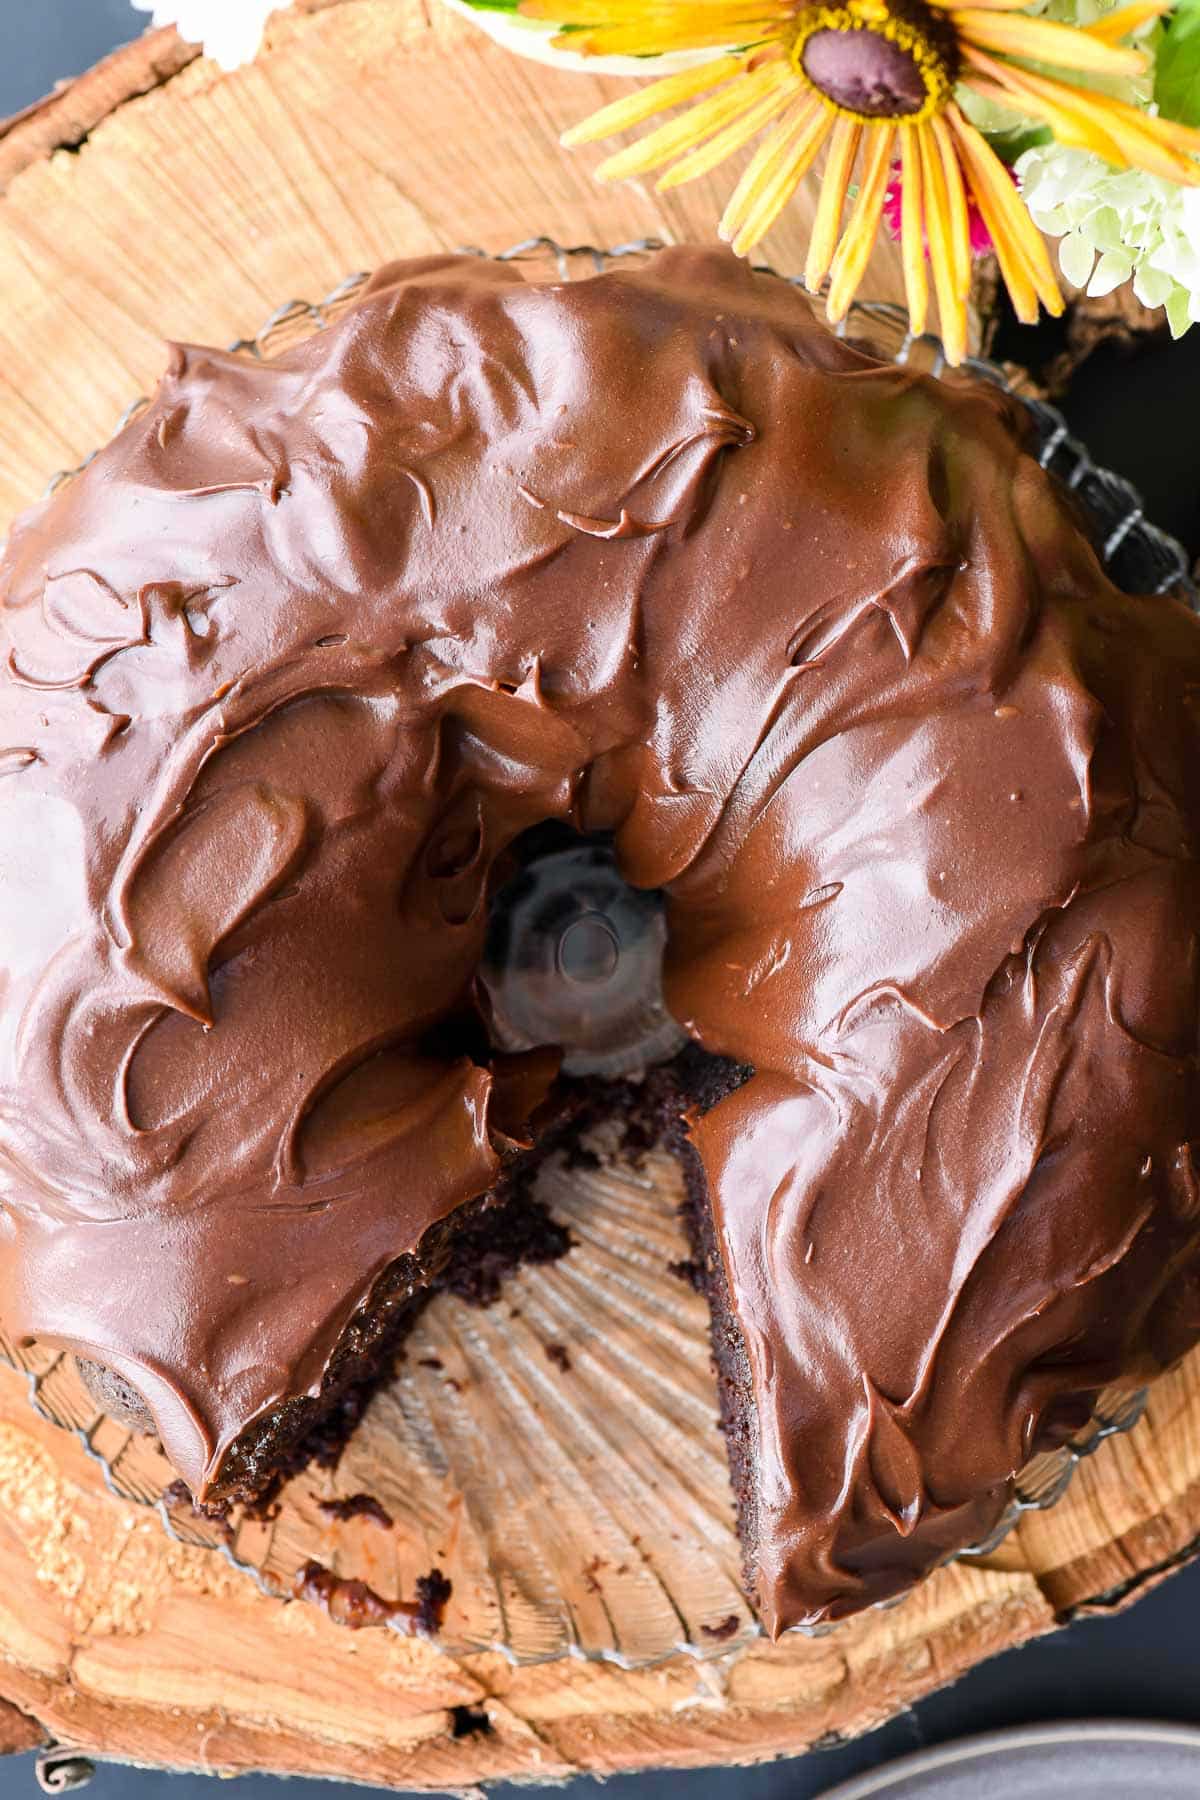 Top down image of a frosted chocolate bundt cake on a wood background.